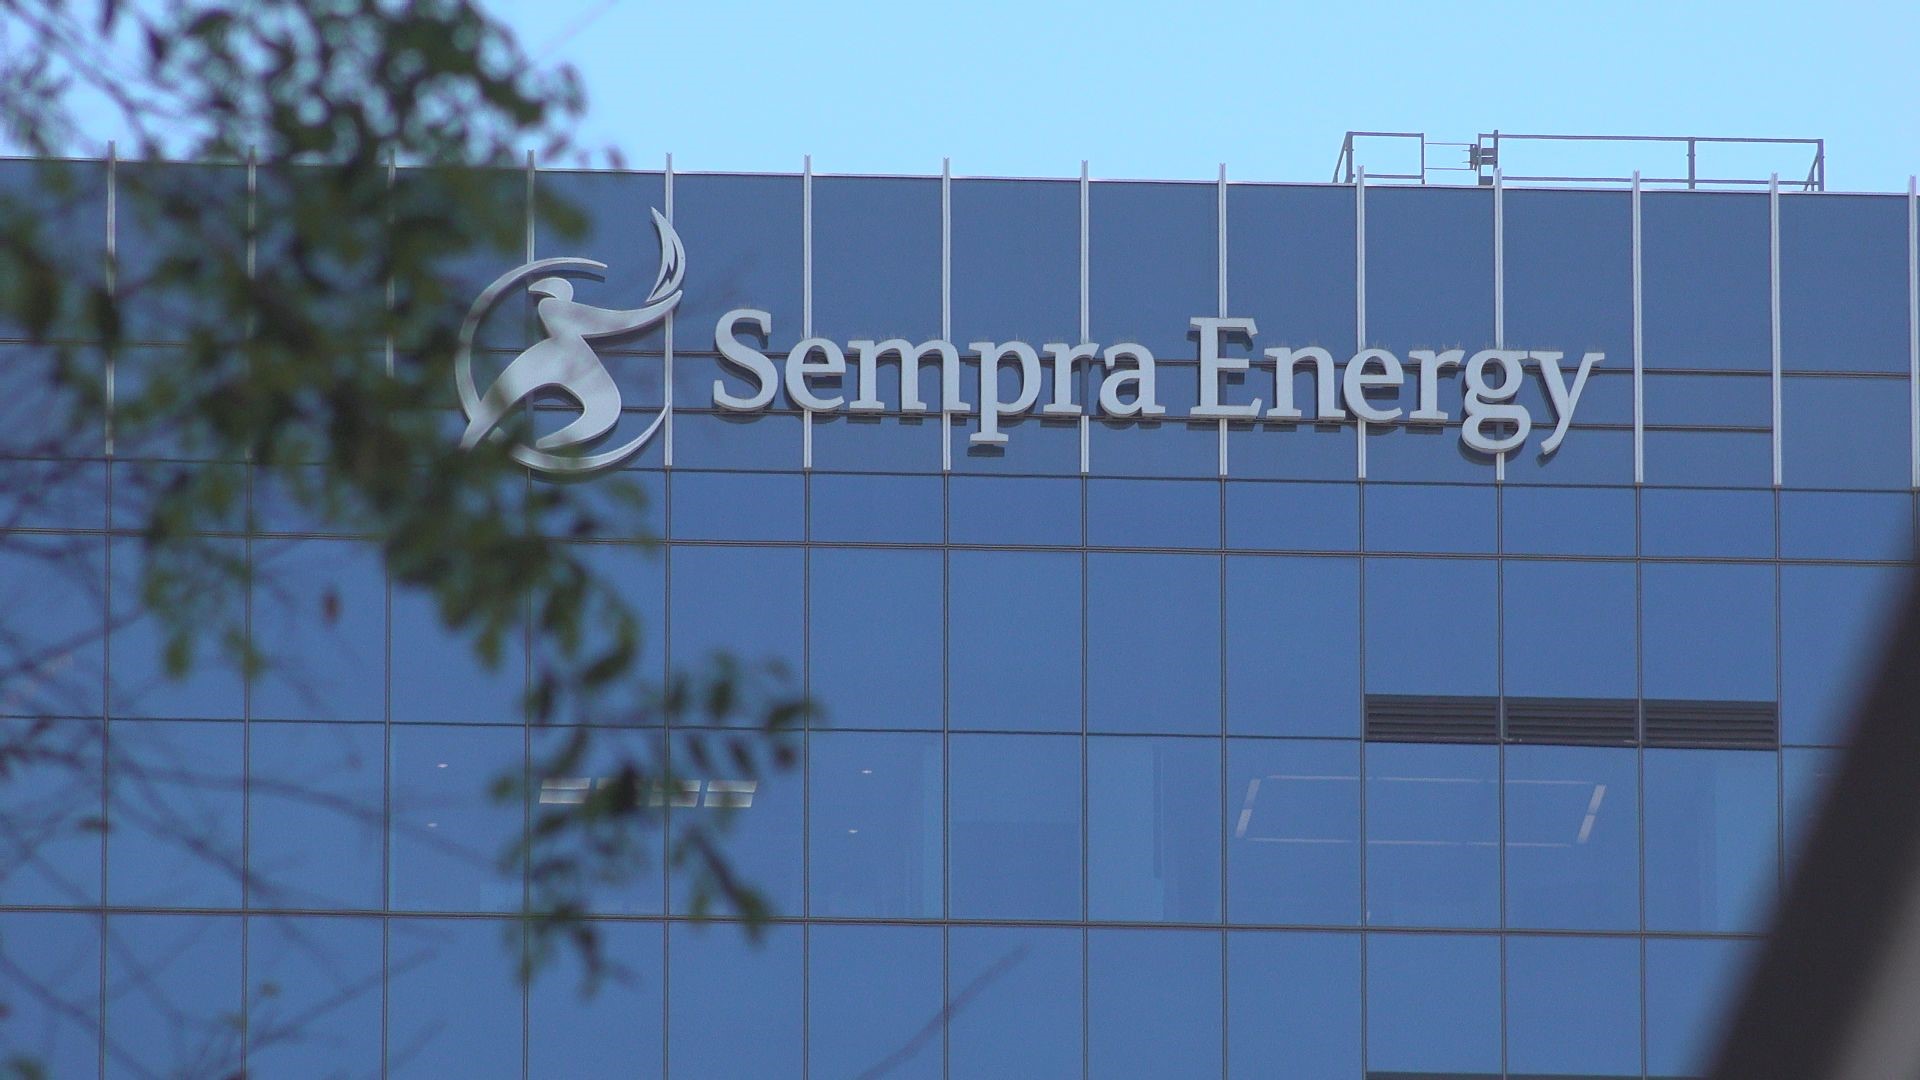 When it comes to fourth quarter earnings, Sempra took in $743 million in 2022 which is up from the $688 million they posted in the fourth quarter of 2021.